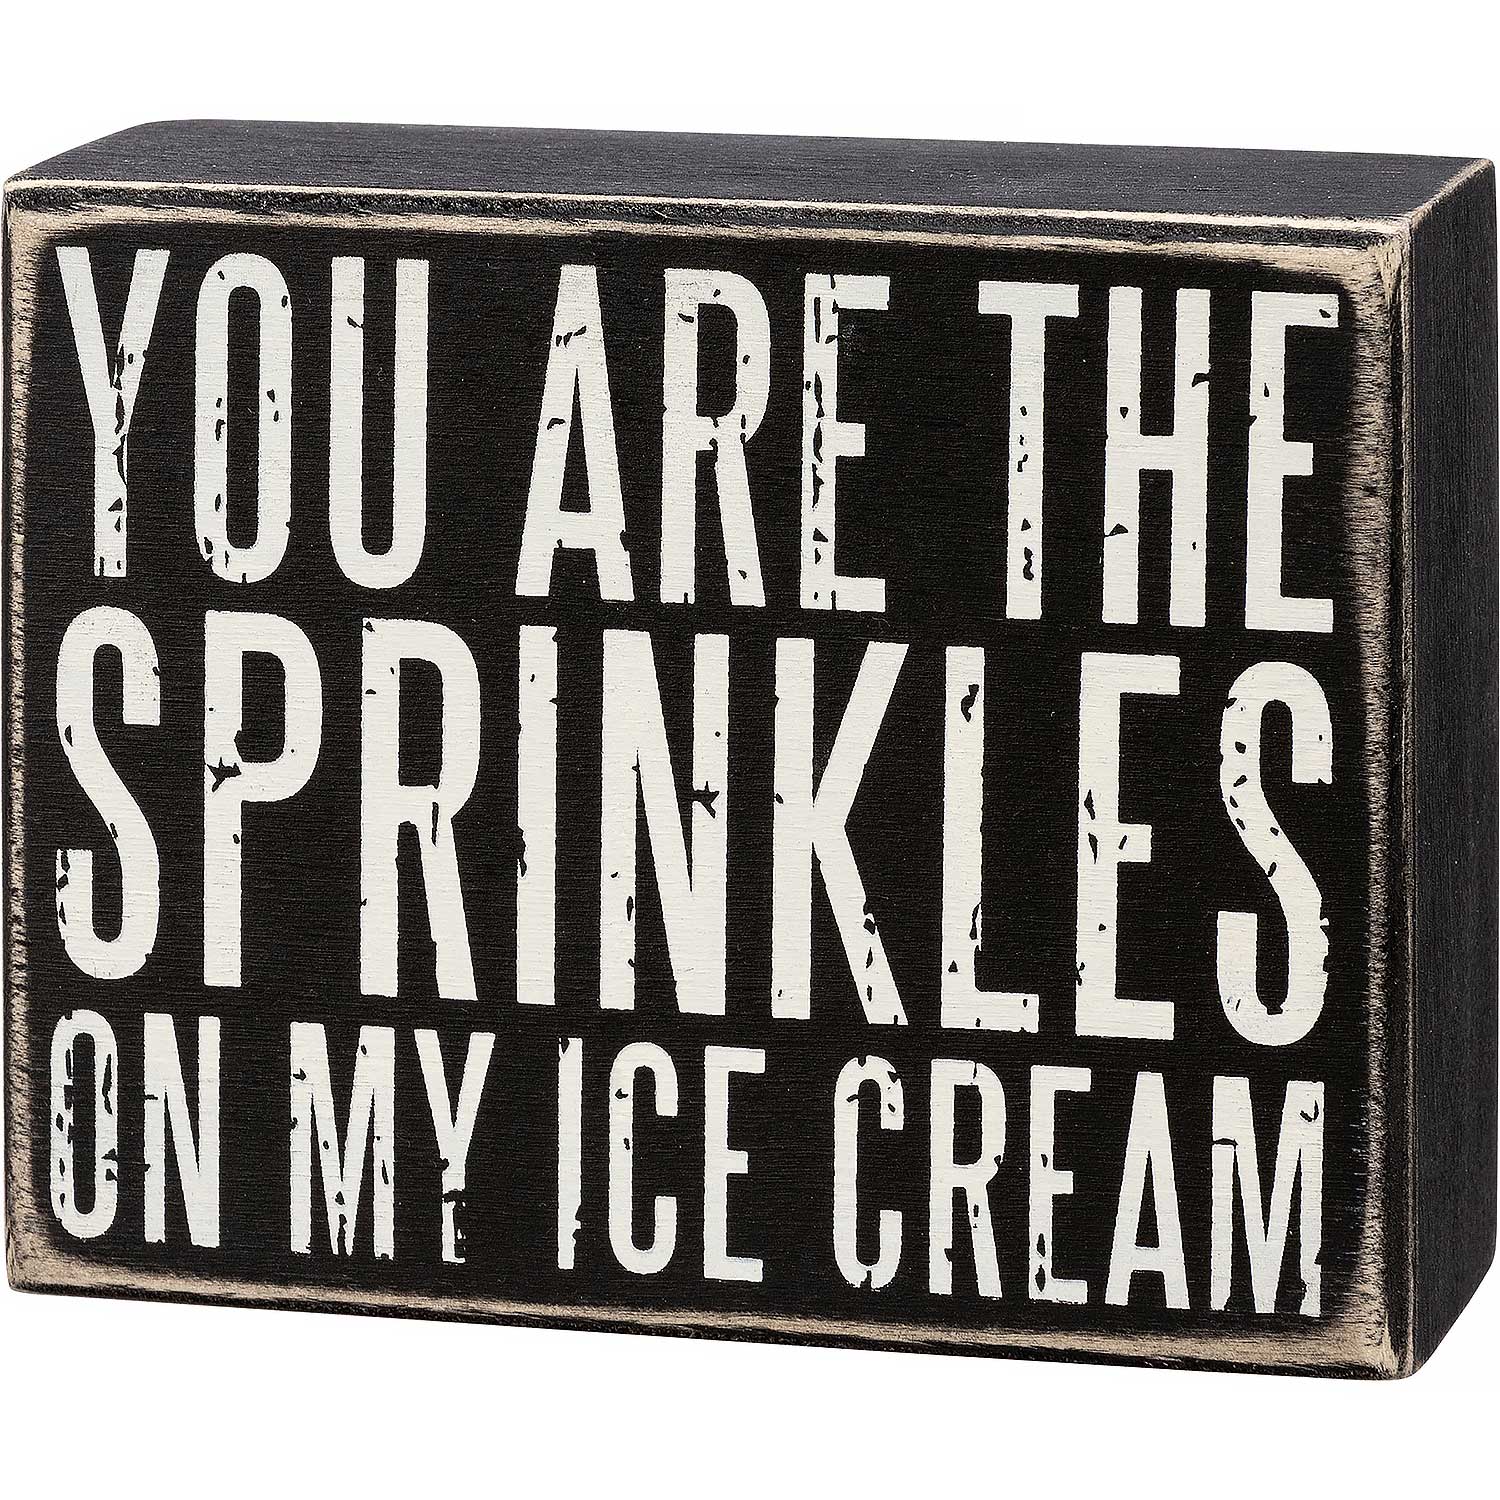 You Are The Sprinkles Box Sign